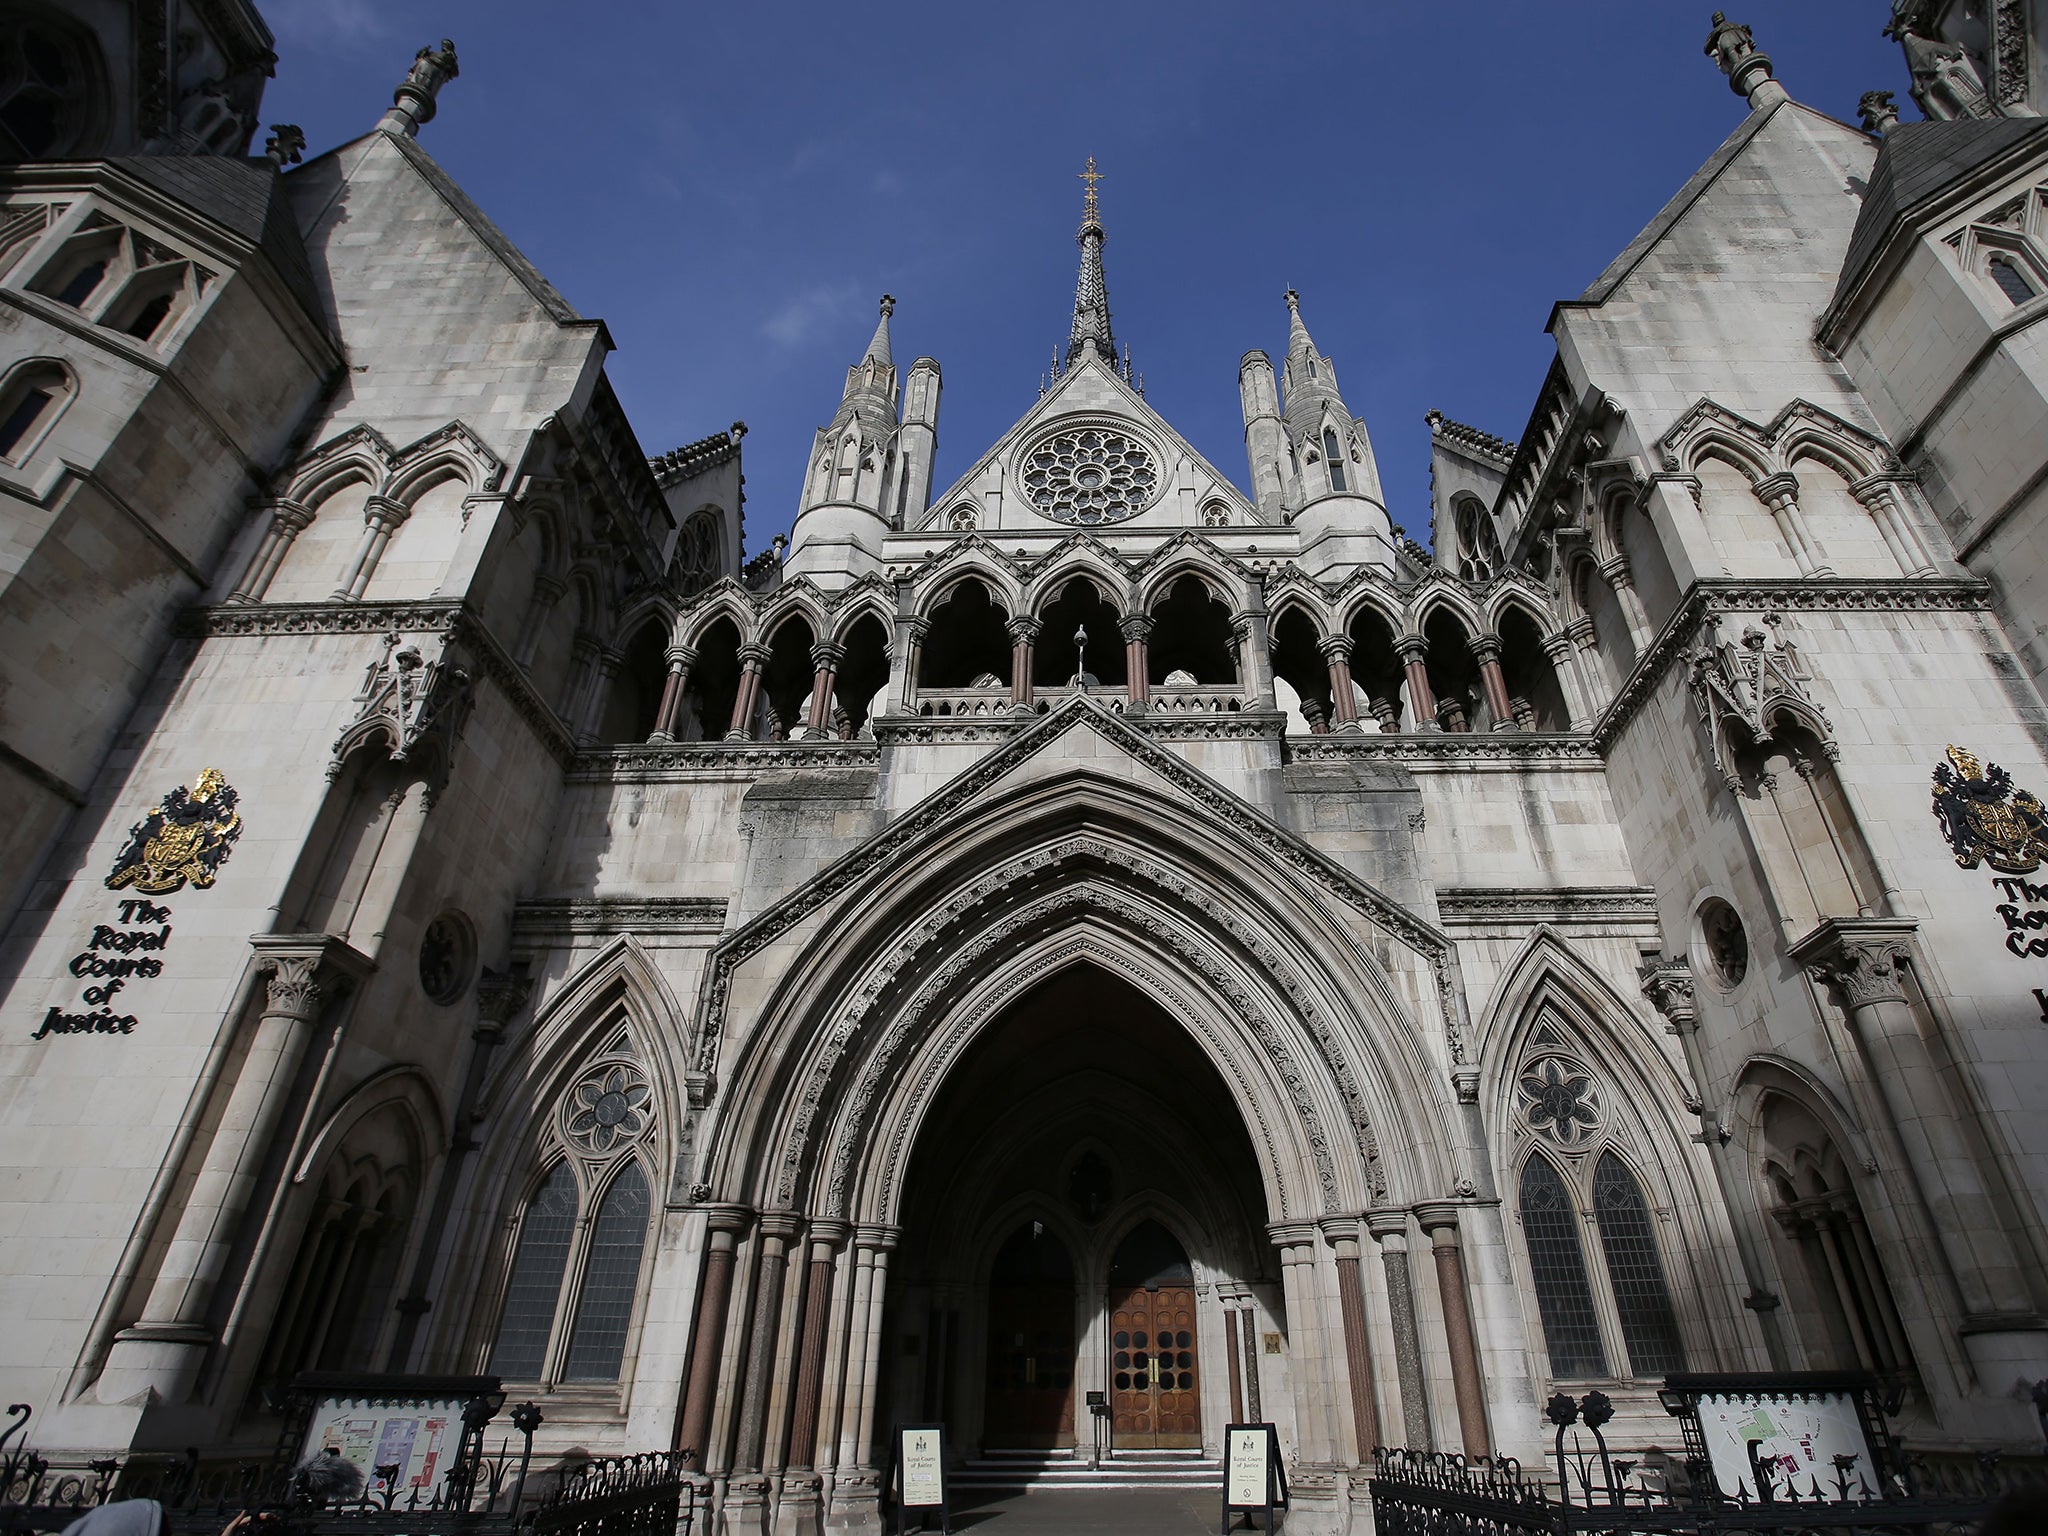 The Royal Courts of Justice. A significant proportion of civil court judges have reported being harassed online